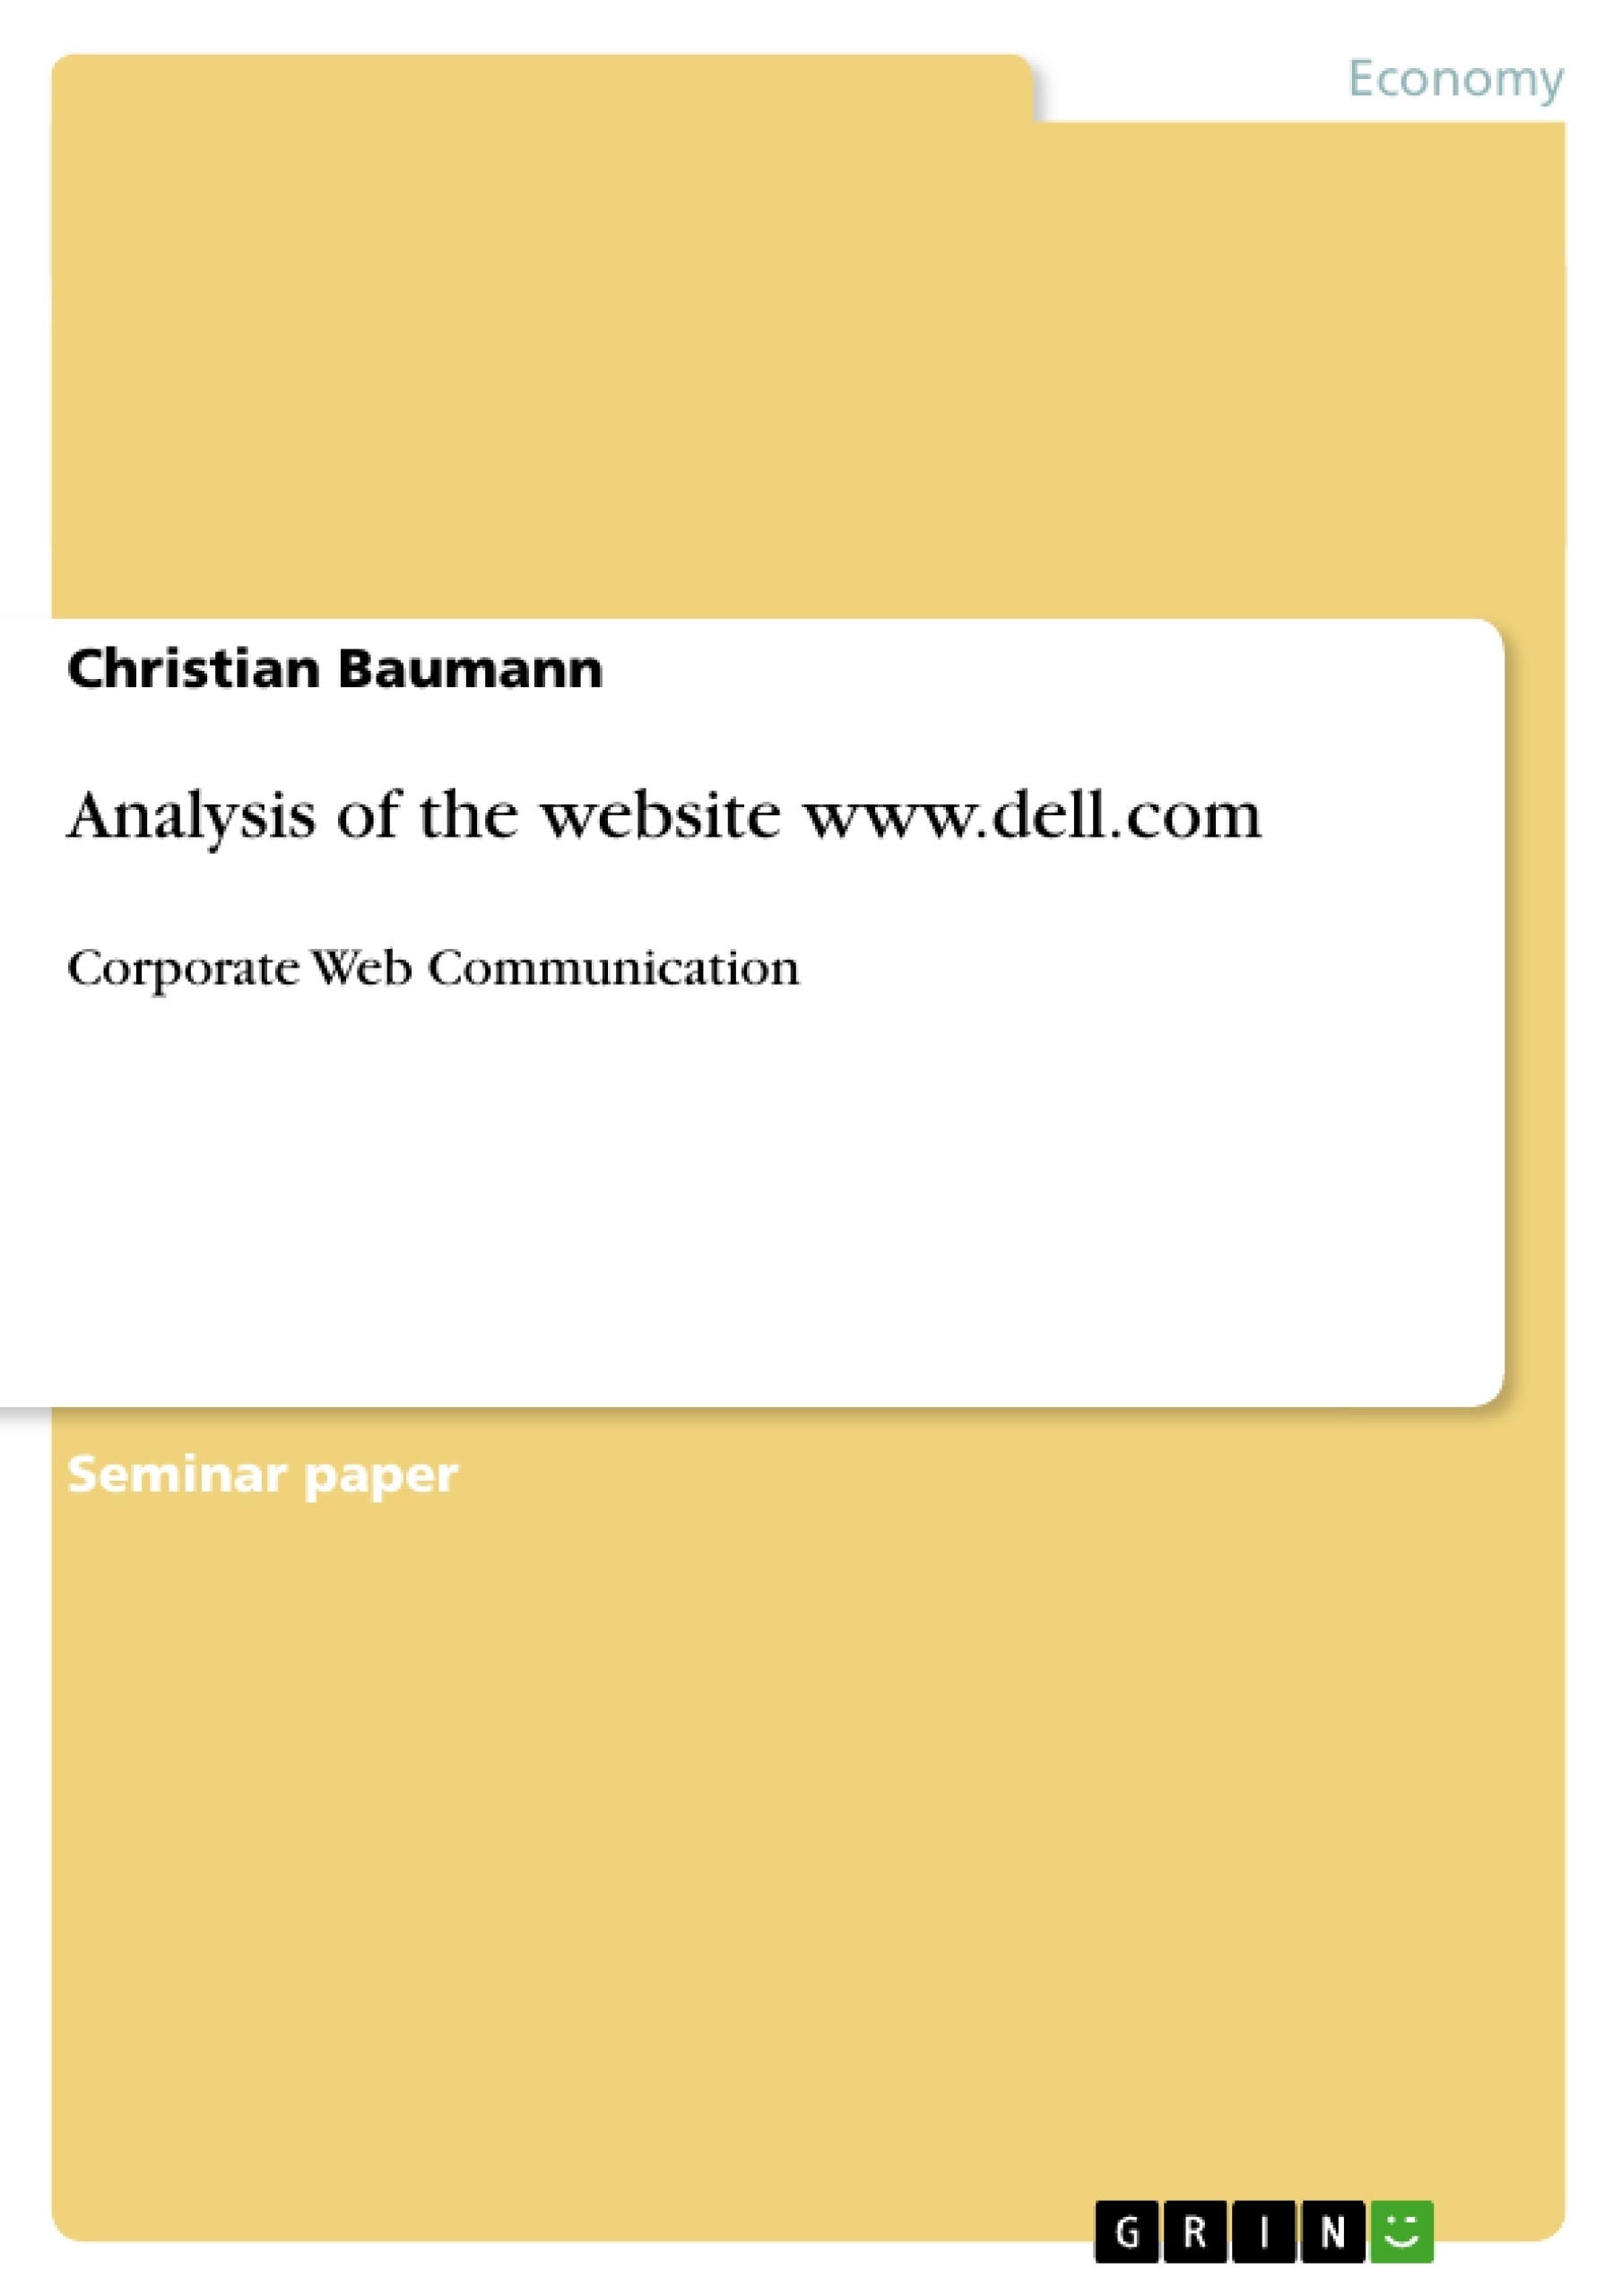 Title: Analysis of the website www.dell.com